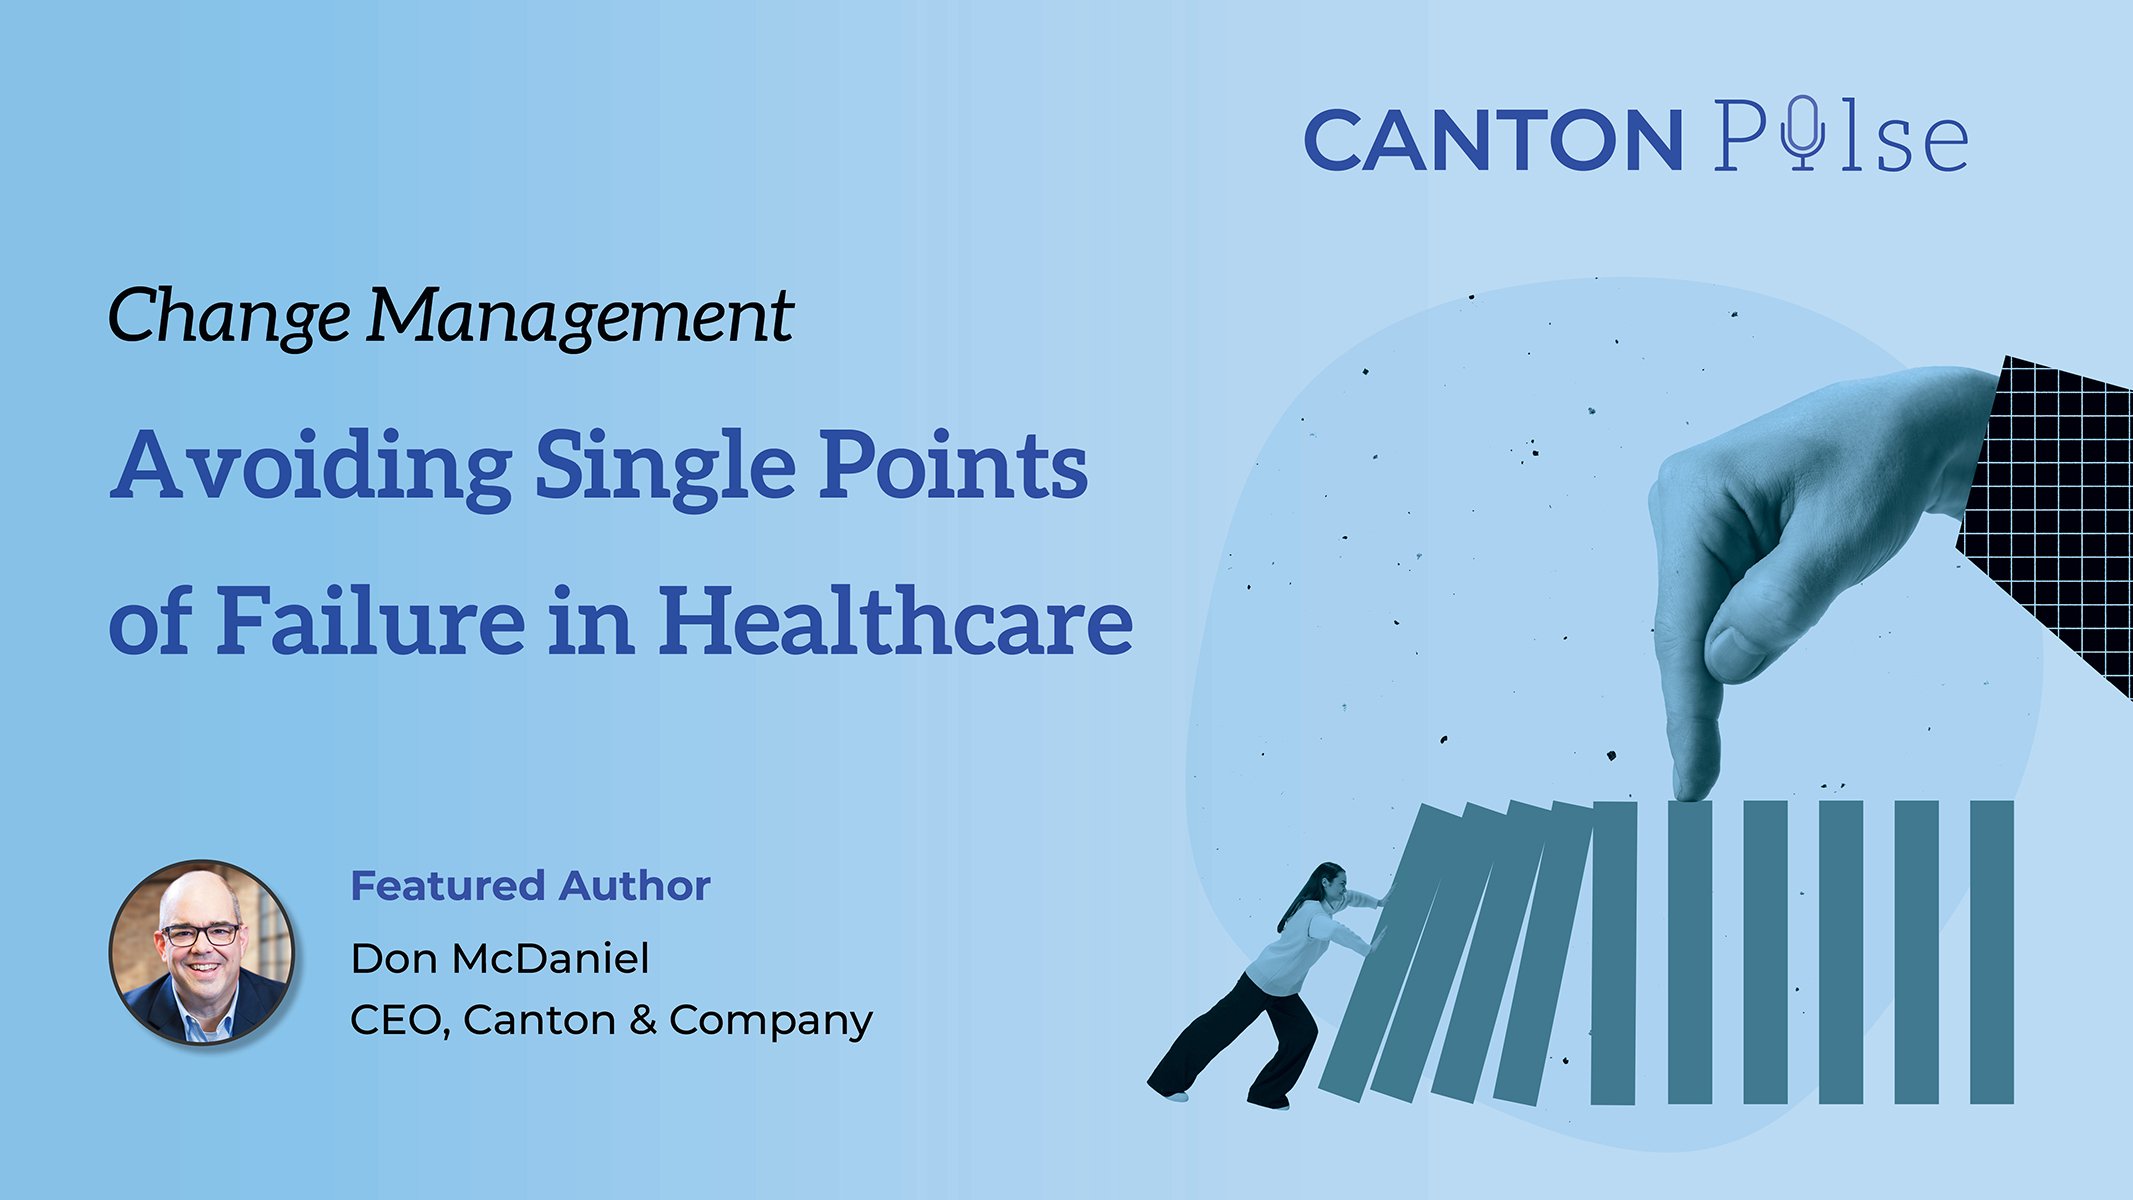 Change Management: Avoiding Single Points of Failure in Healthcare by Don McDaniel Canton & Company